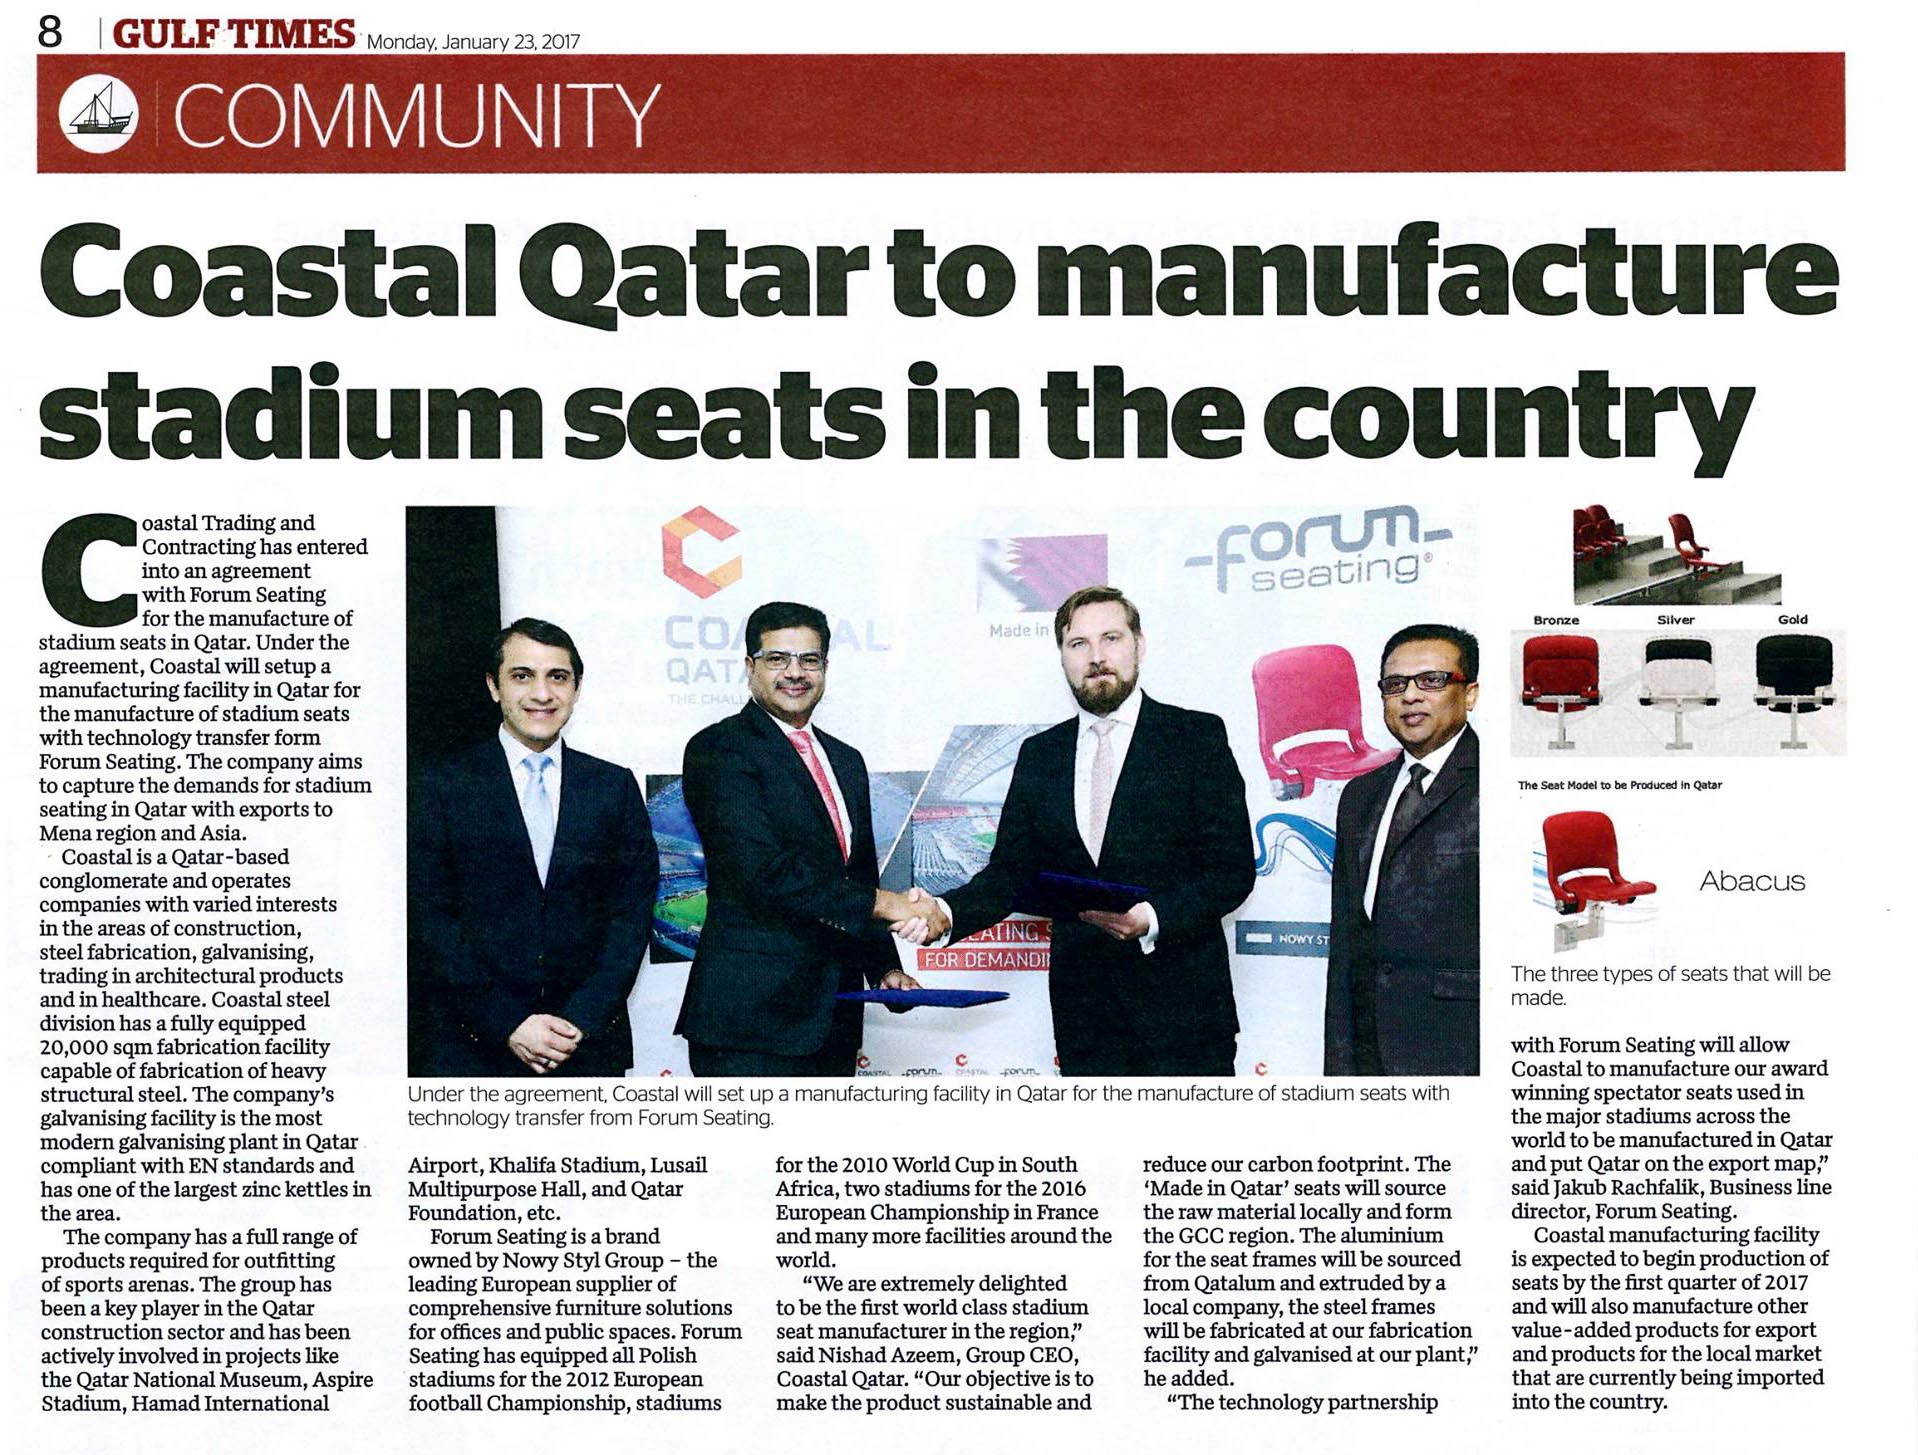 Our stadium chairs will be produced in Qatar